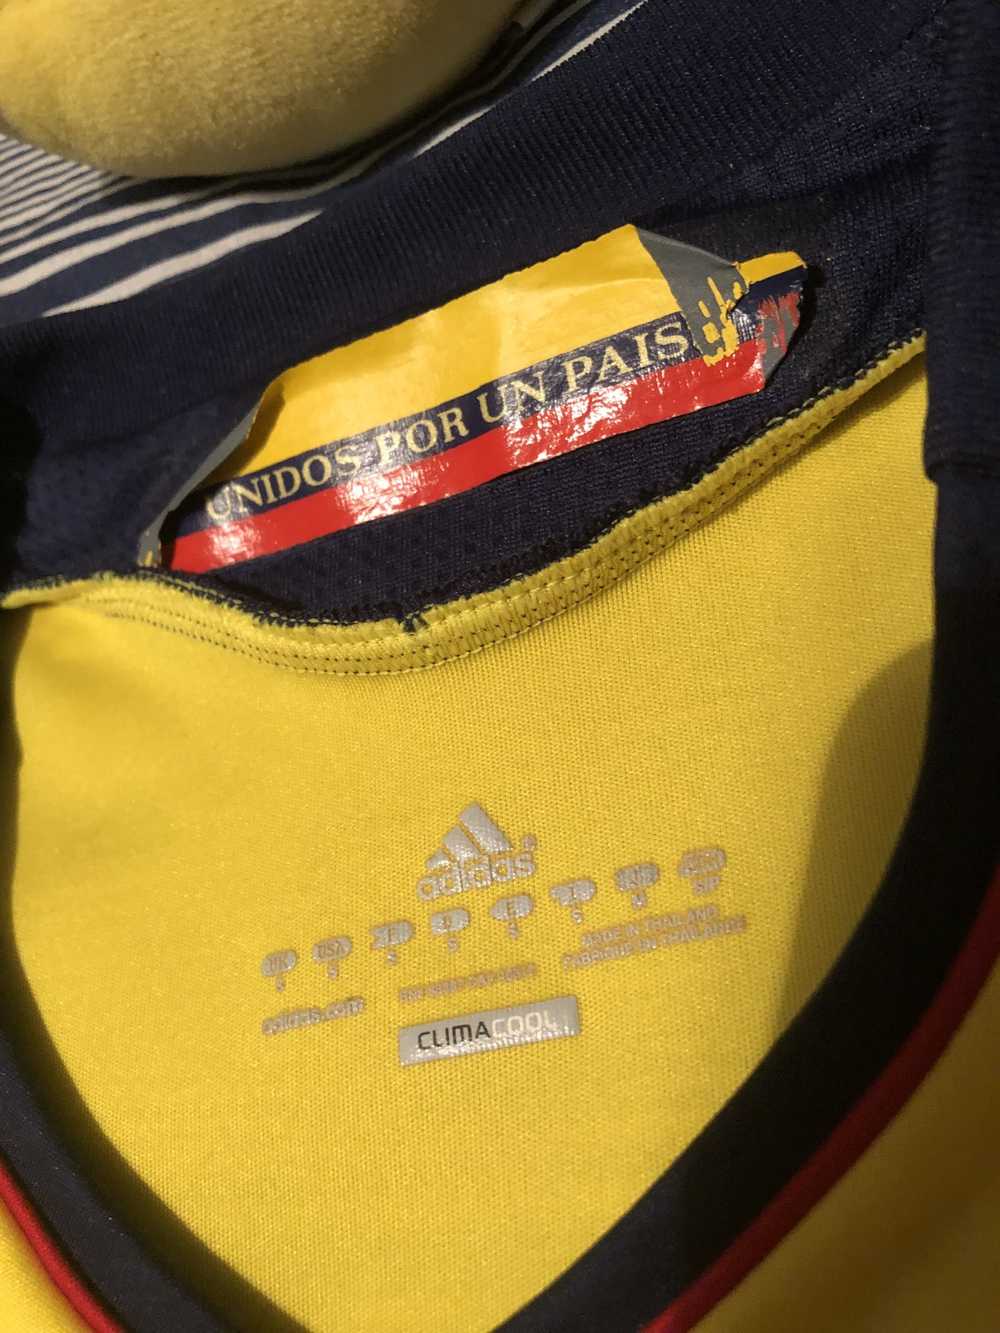 Adidas Colombia 2013 Jersey - image 2